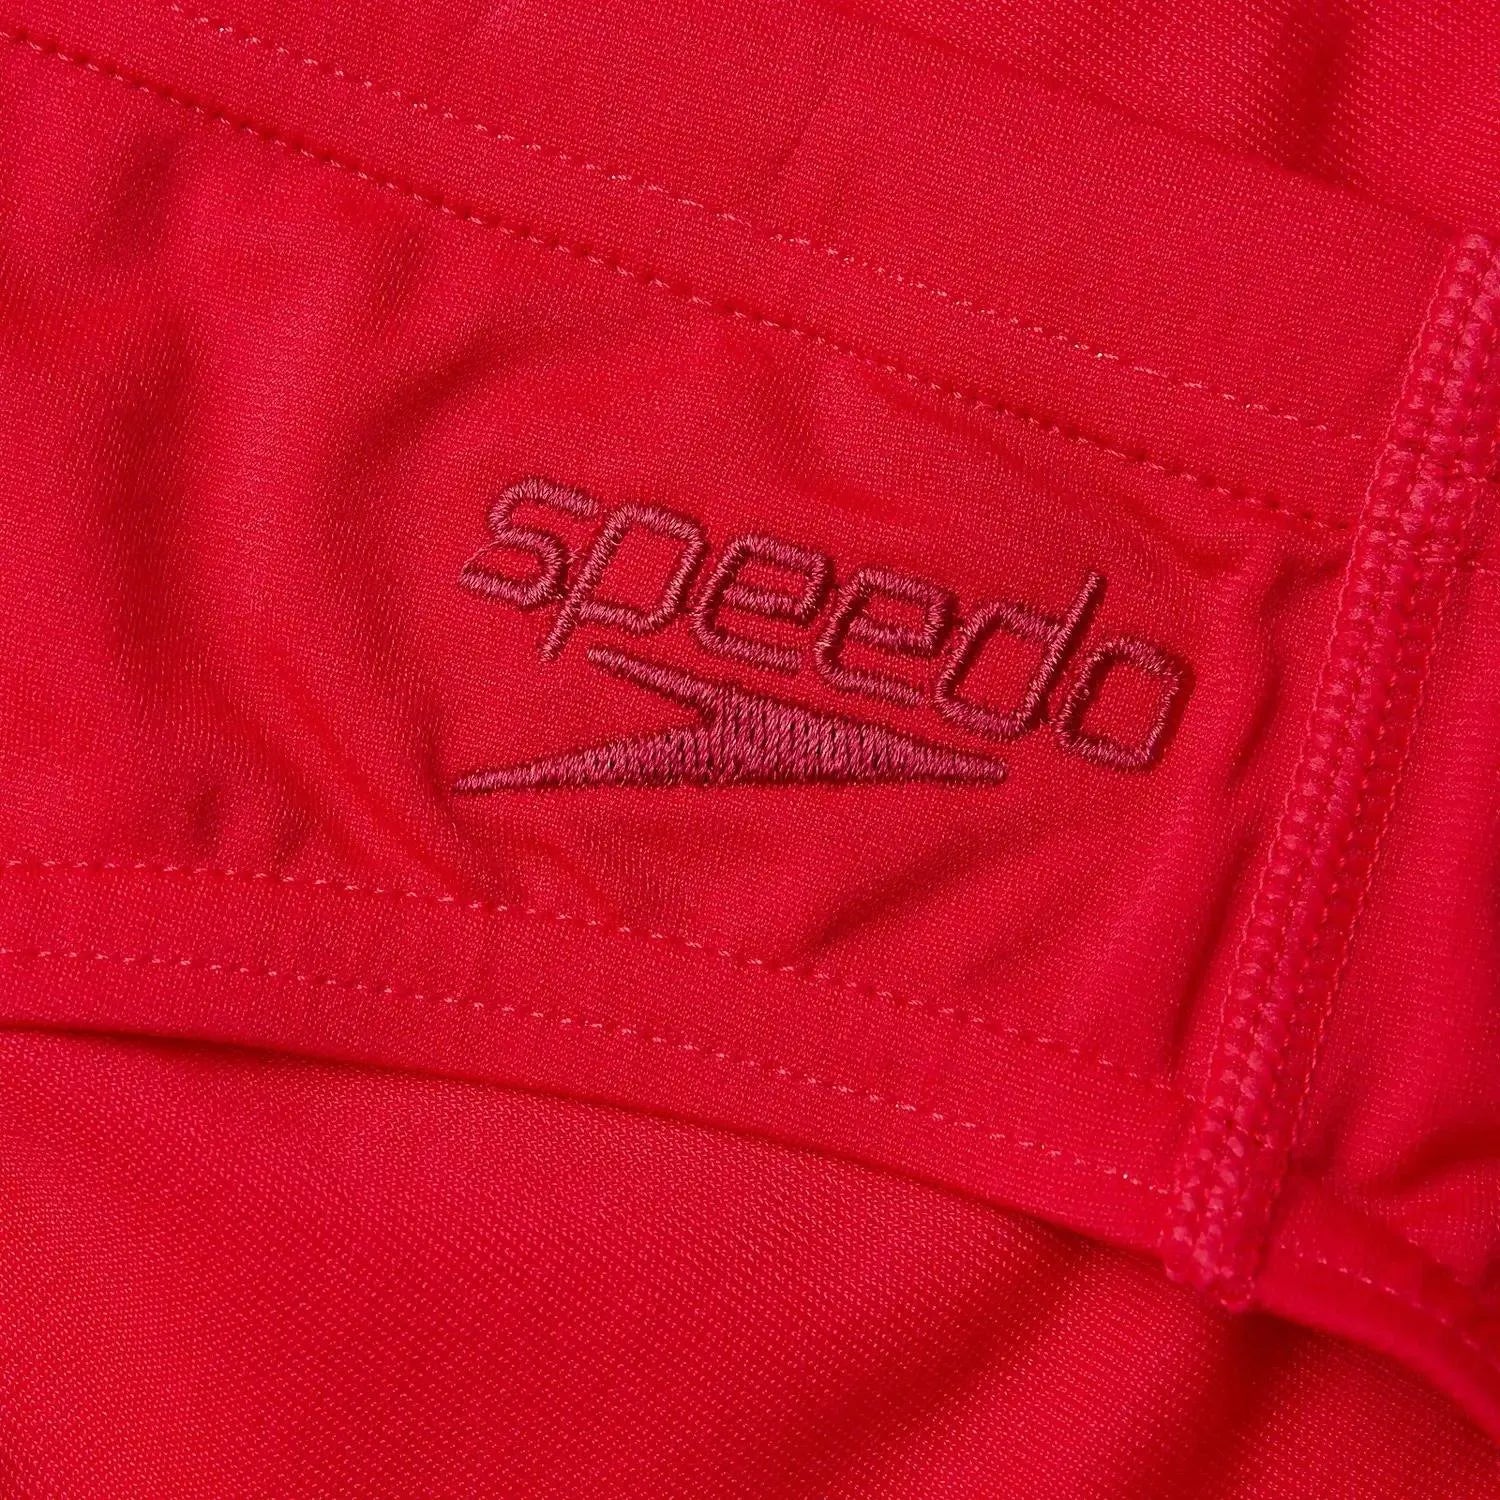 Speedo Red Eco Endurance+ Brief. Sustainable style & performance for your swim (mention size if relevant).Look Good, Feel Good, Do Good. Sustainable performance and bold style in one eco-friendly Speedo brief.